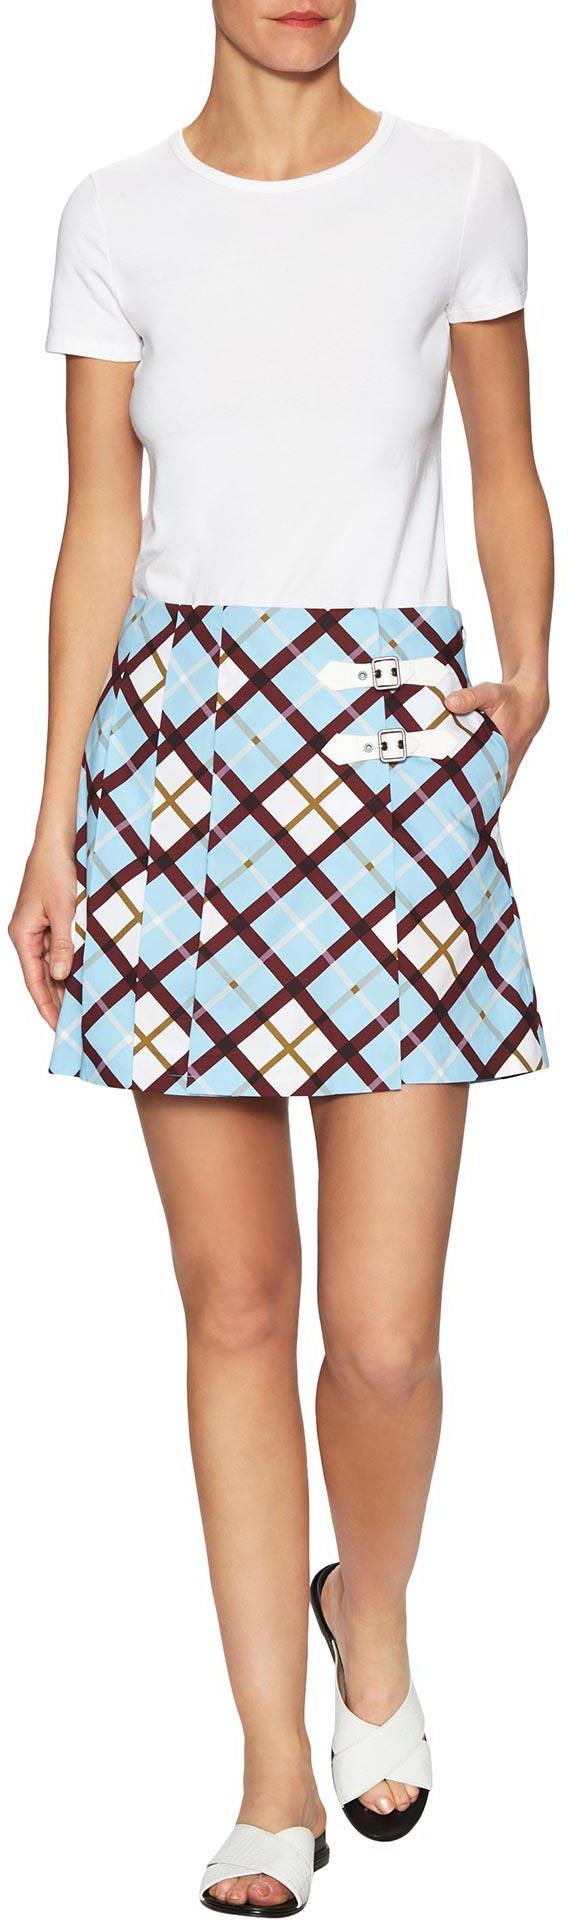 Marc by Marc Jacobs - WRAP FRONT SKIRT